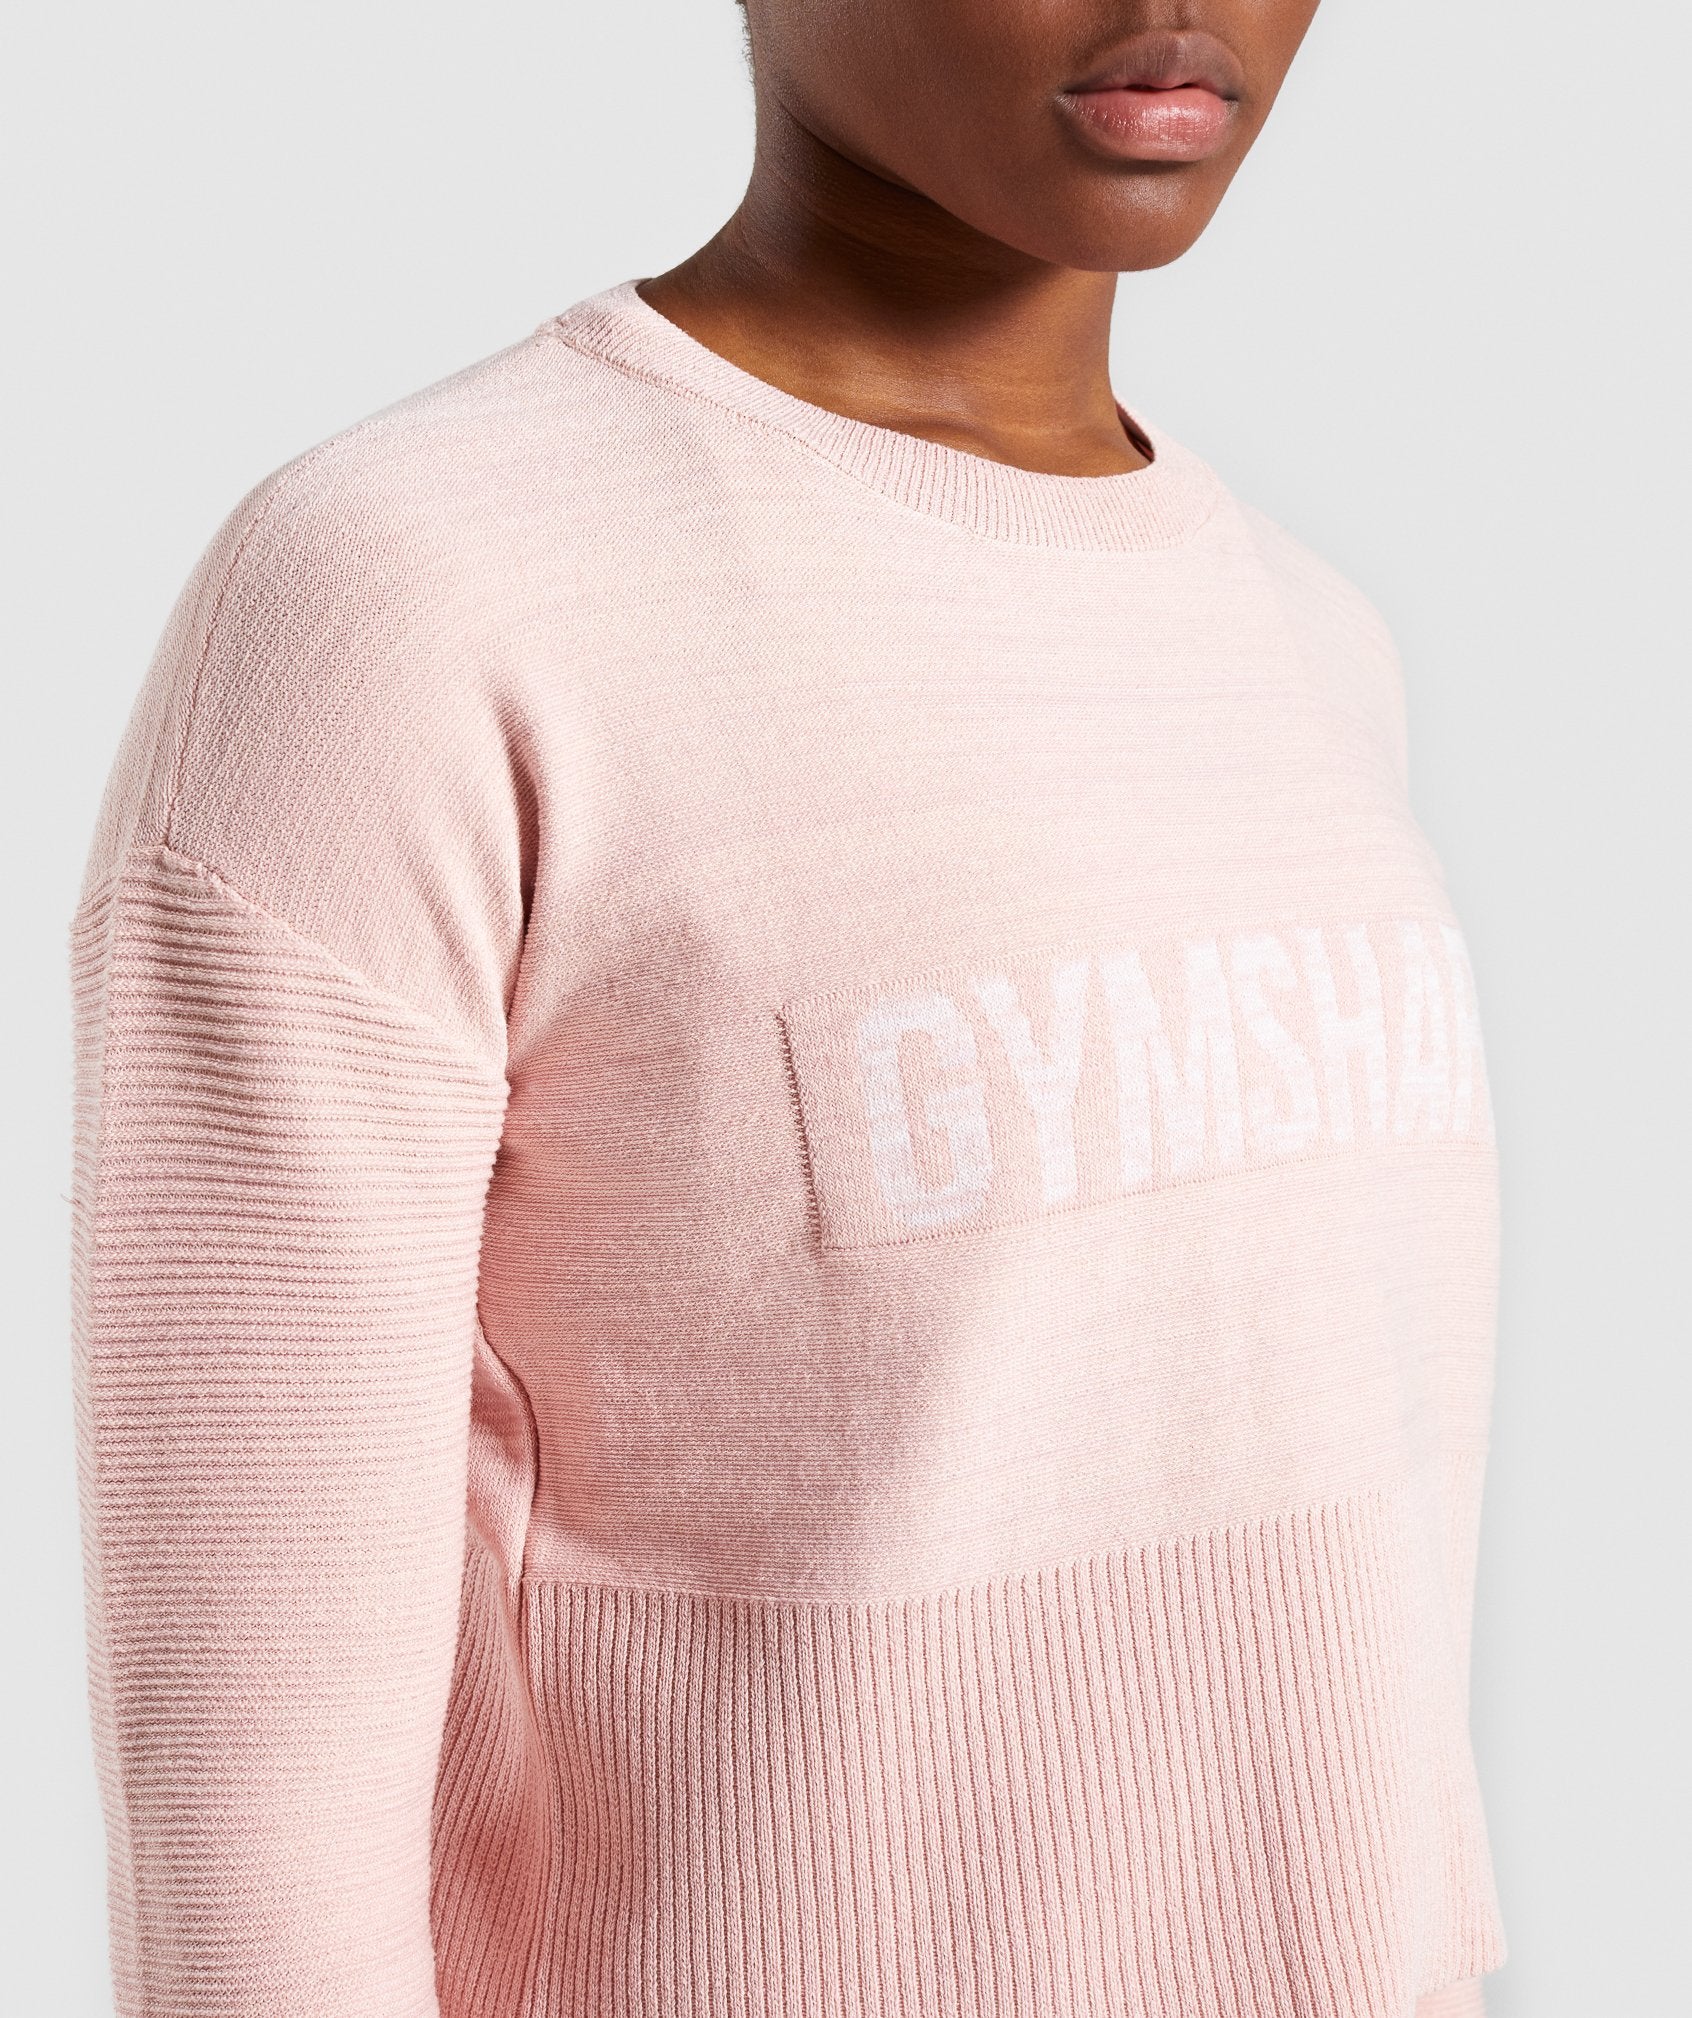 Time Out Knit Sweater in Blush Nude - view 6